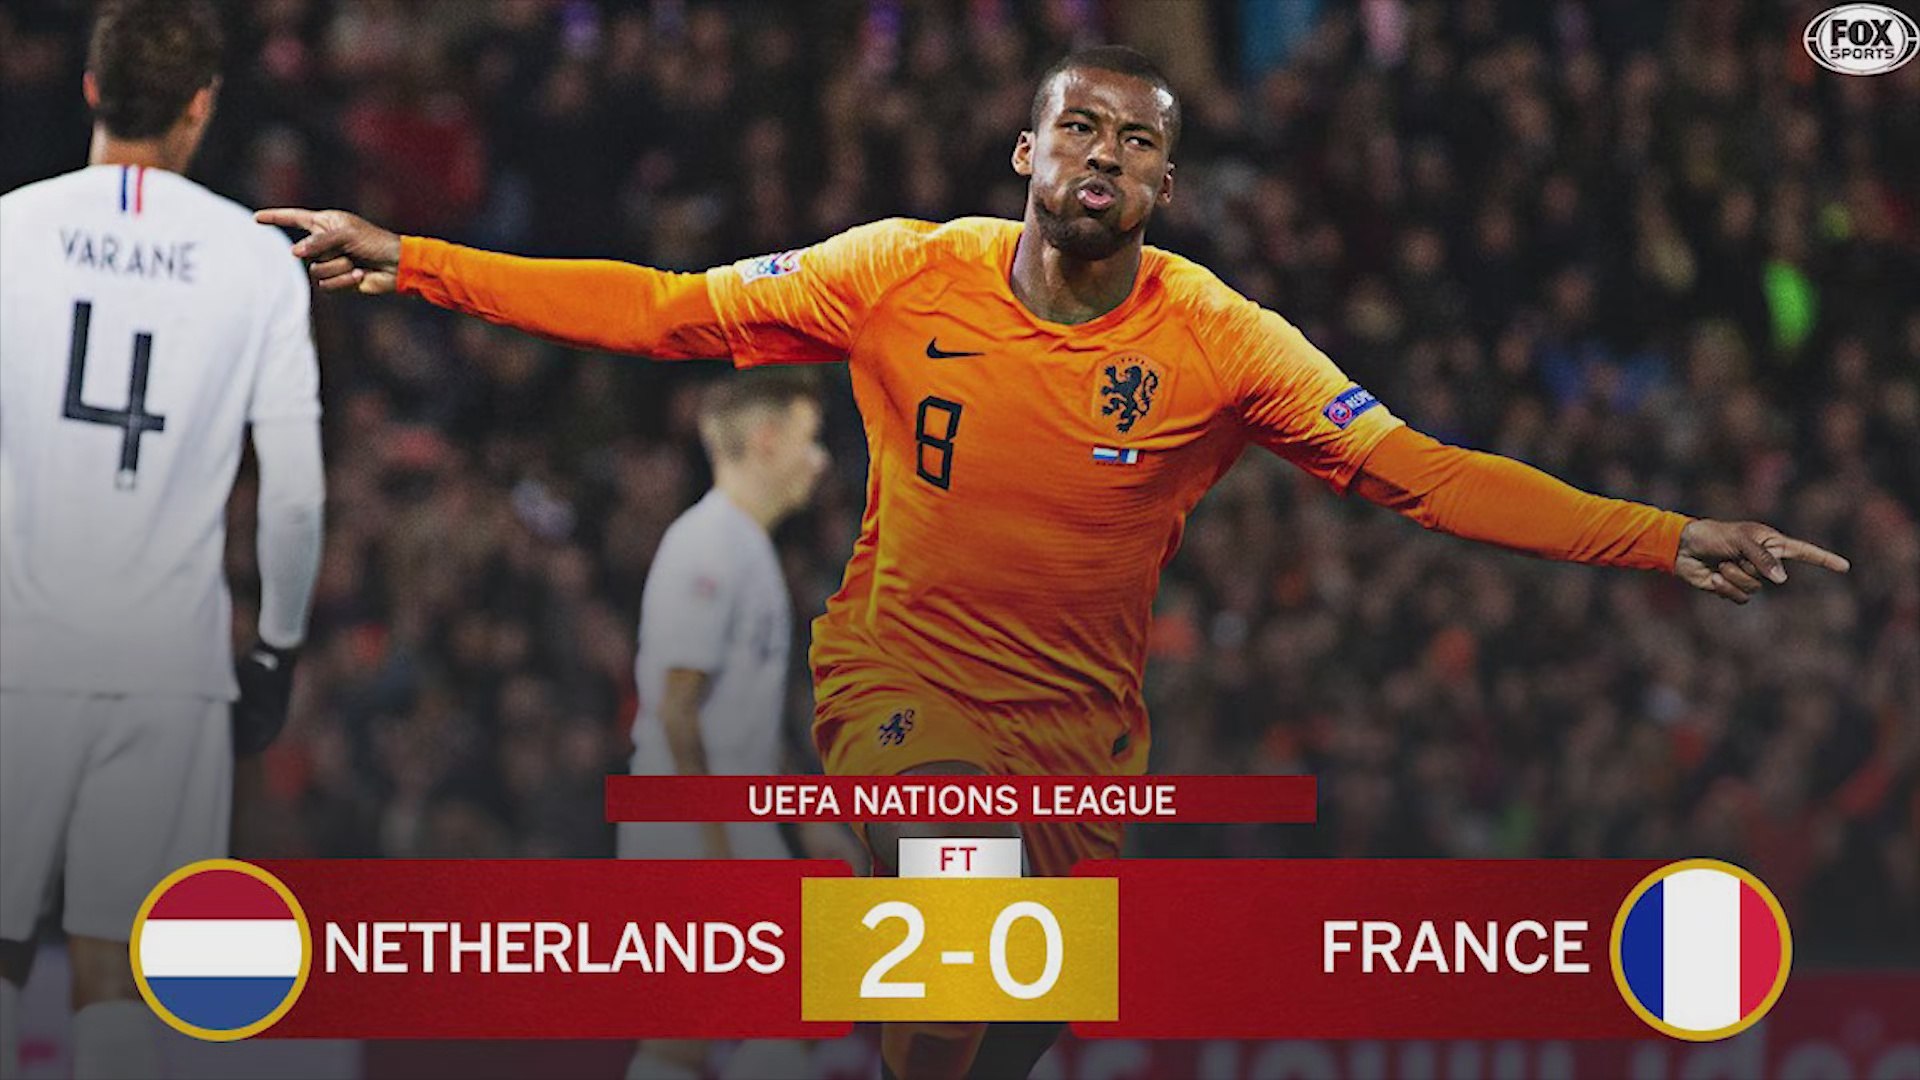 Netherlands France 2-0 Goals | UEFA Nations League | 16/11/2018 - فيديو Dailymotion